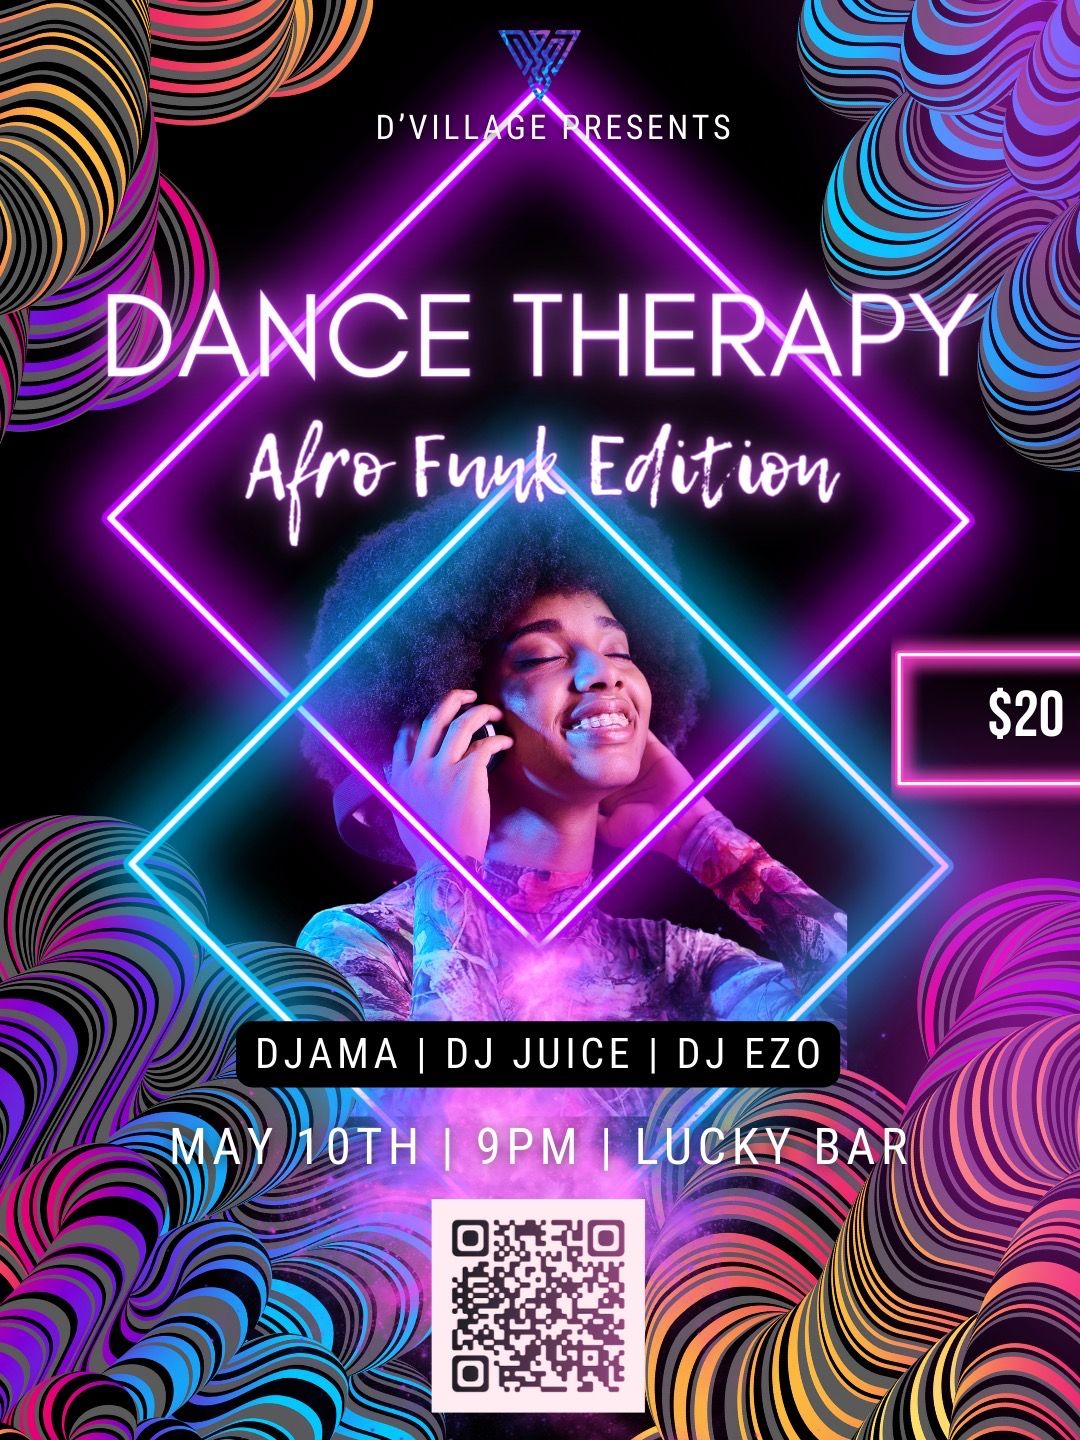 Dance Therapy - Afro Funk Edition